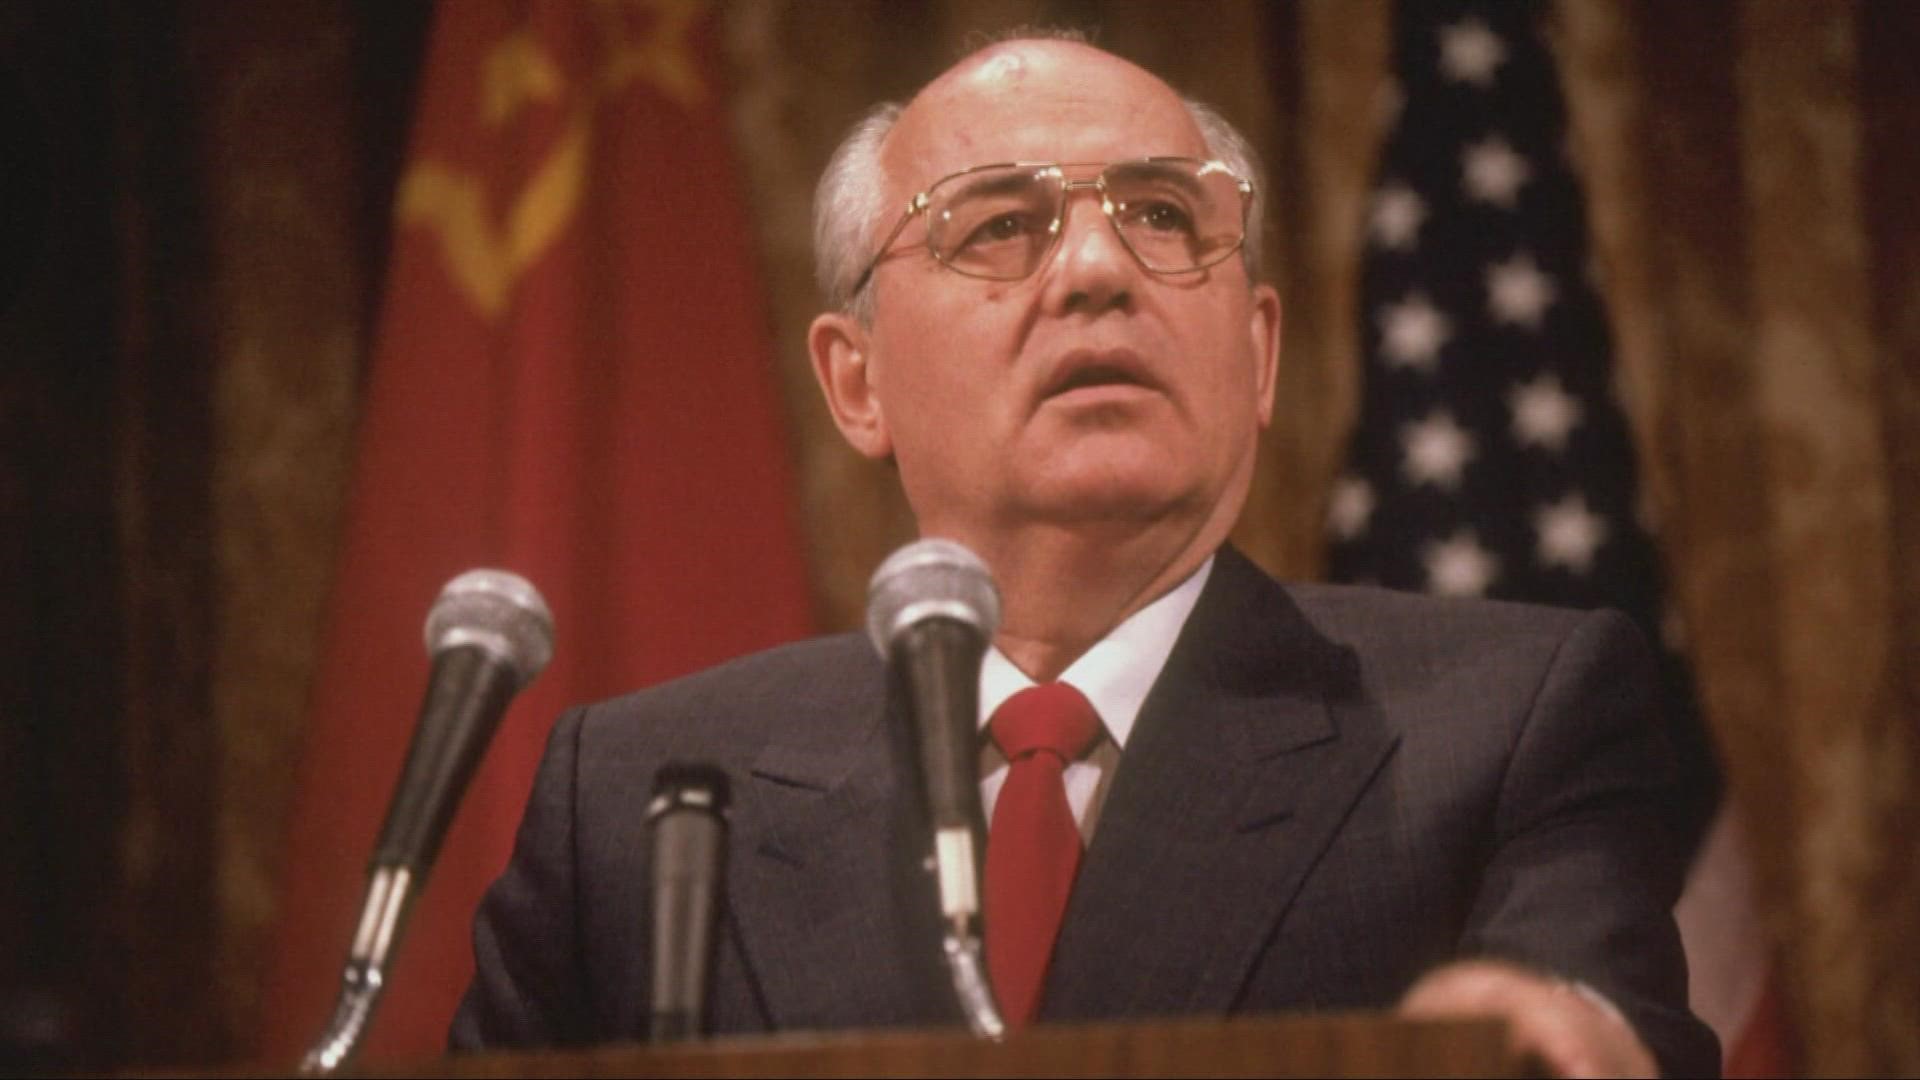 Gorbachev’s office said earlier that he was undergoing treatment at the hospital.